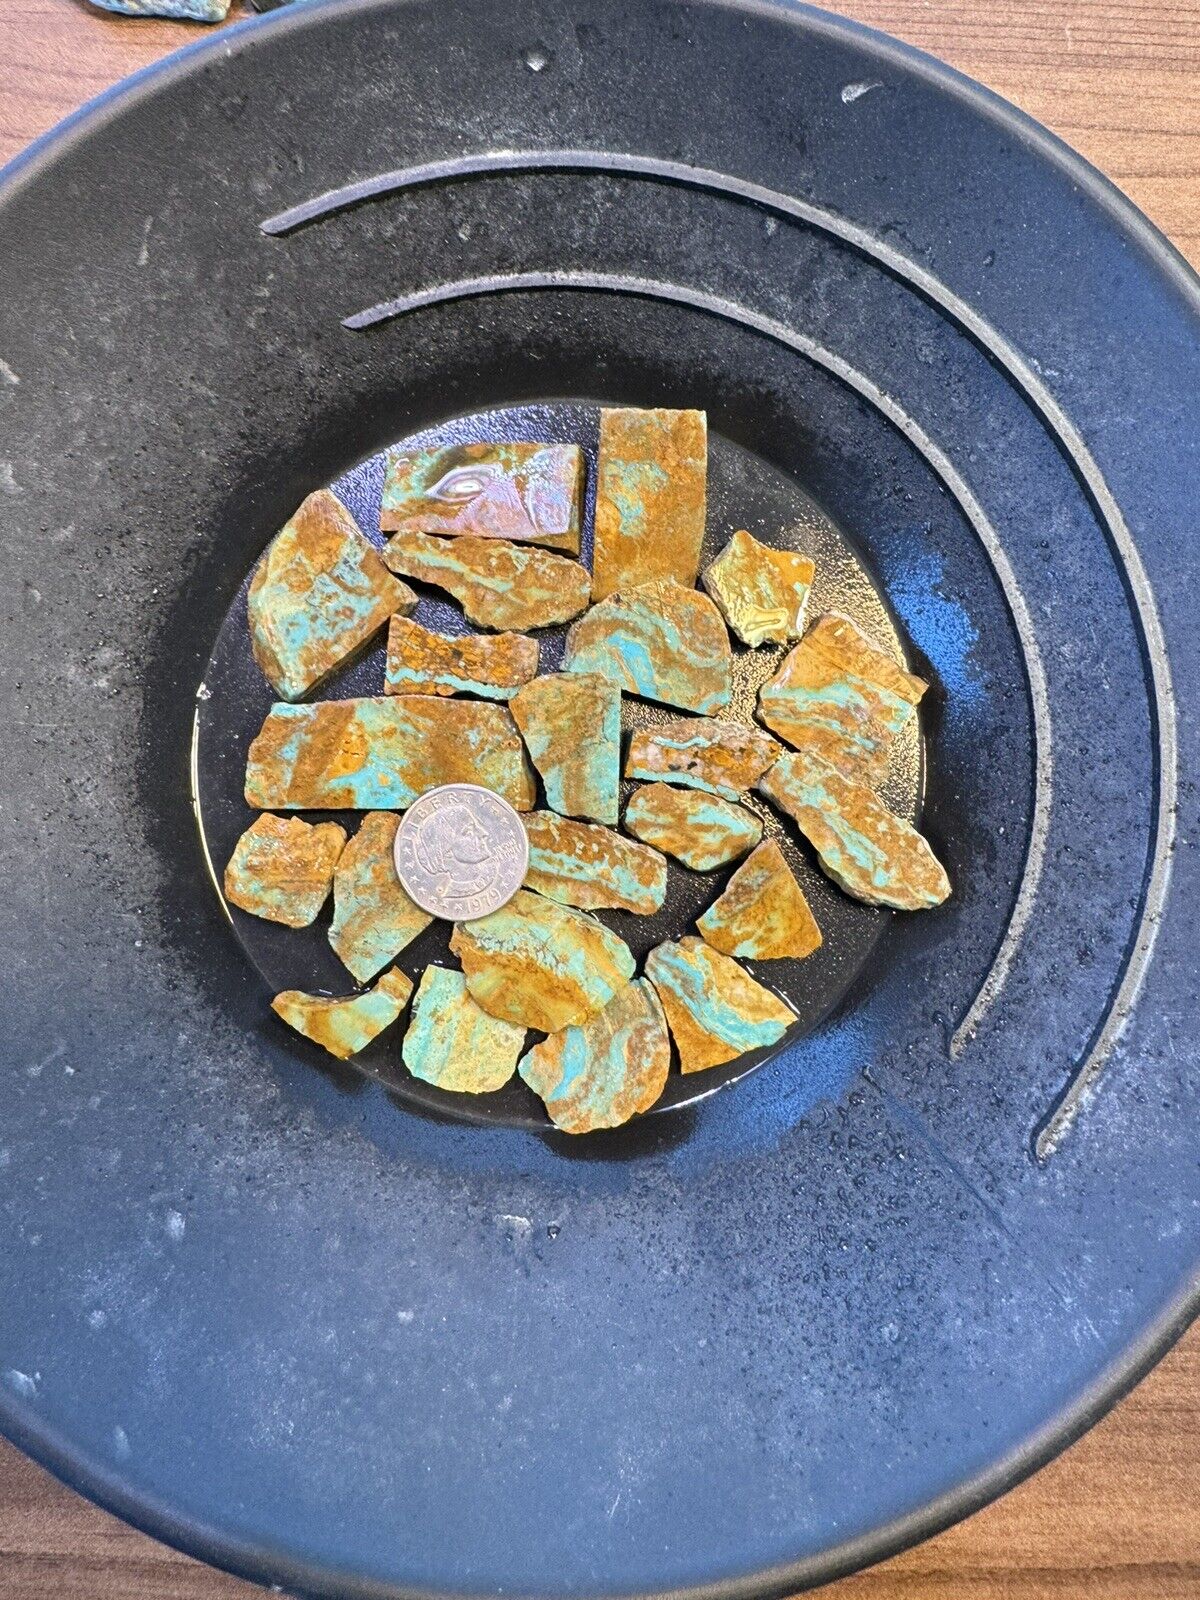 TURQUOISE MOUNTAIN FIRE.  160g Super Grade Slabs Get What You See